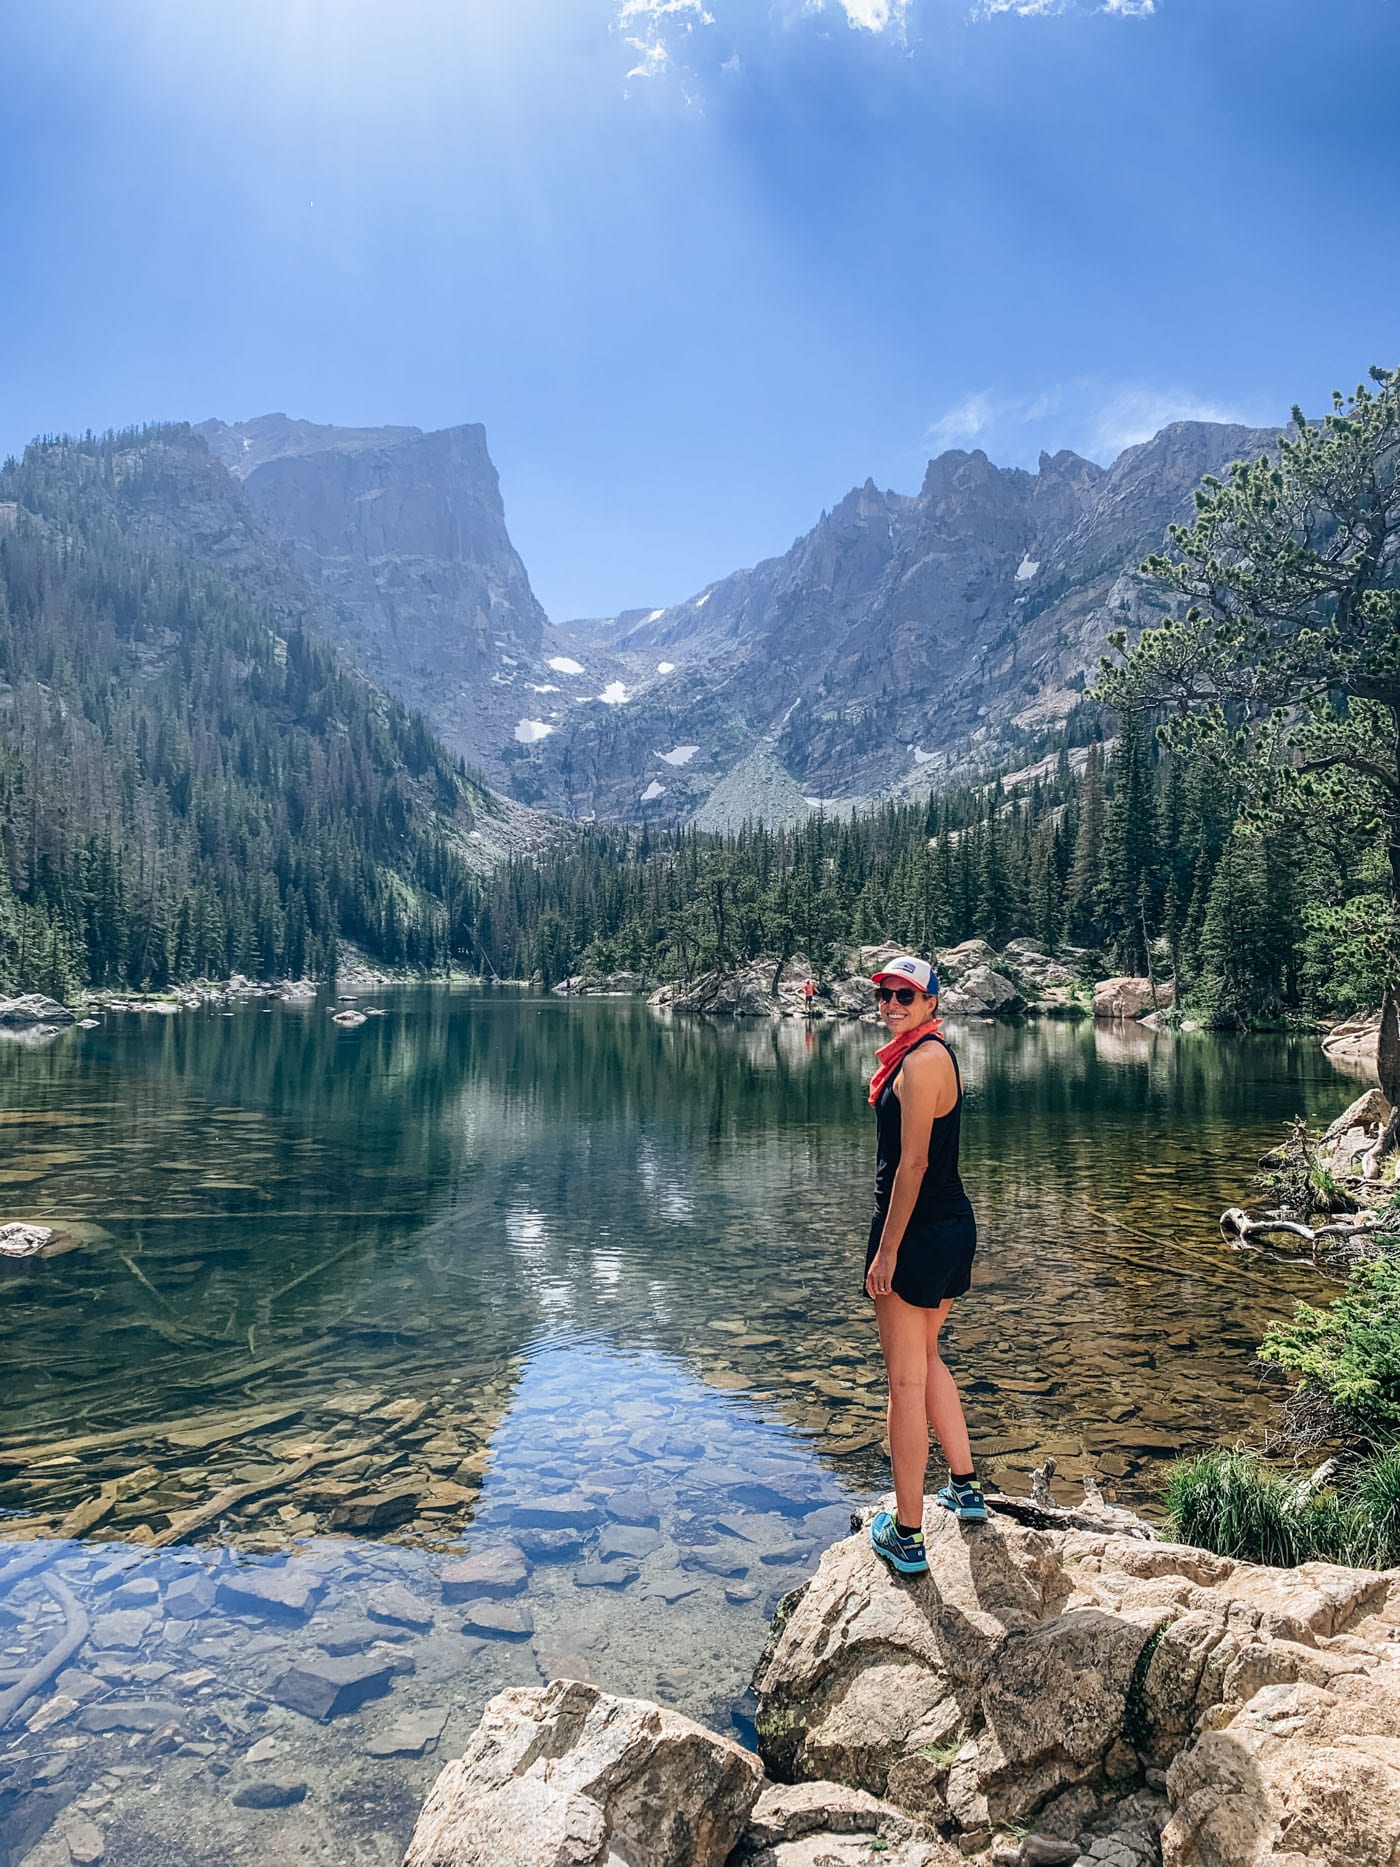 Blue Mountain Belle at Dream Lake in RMNP